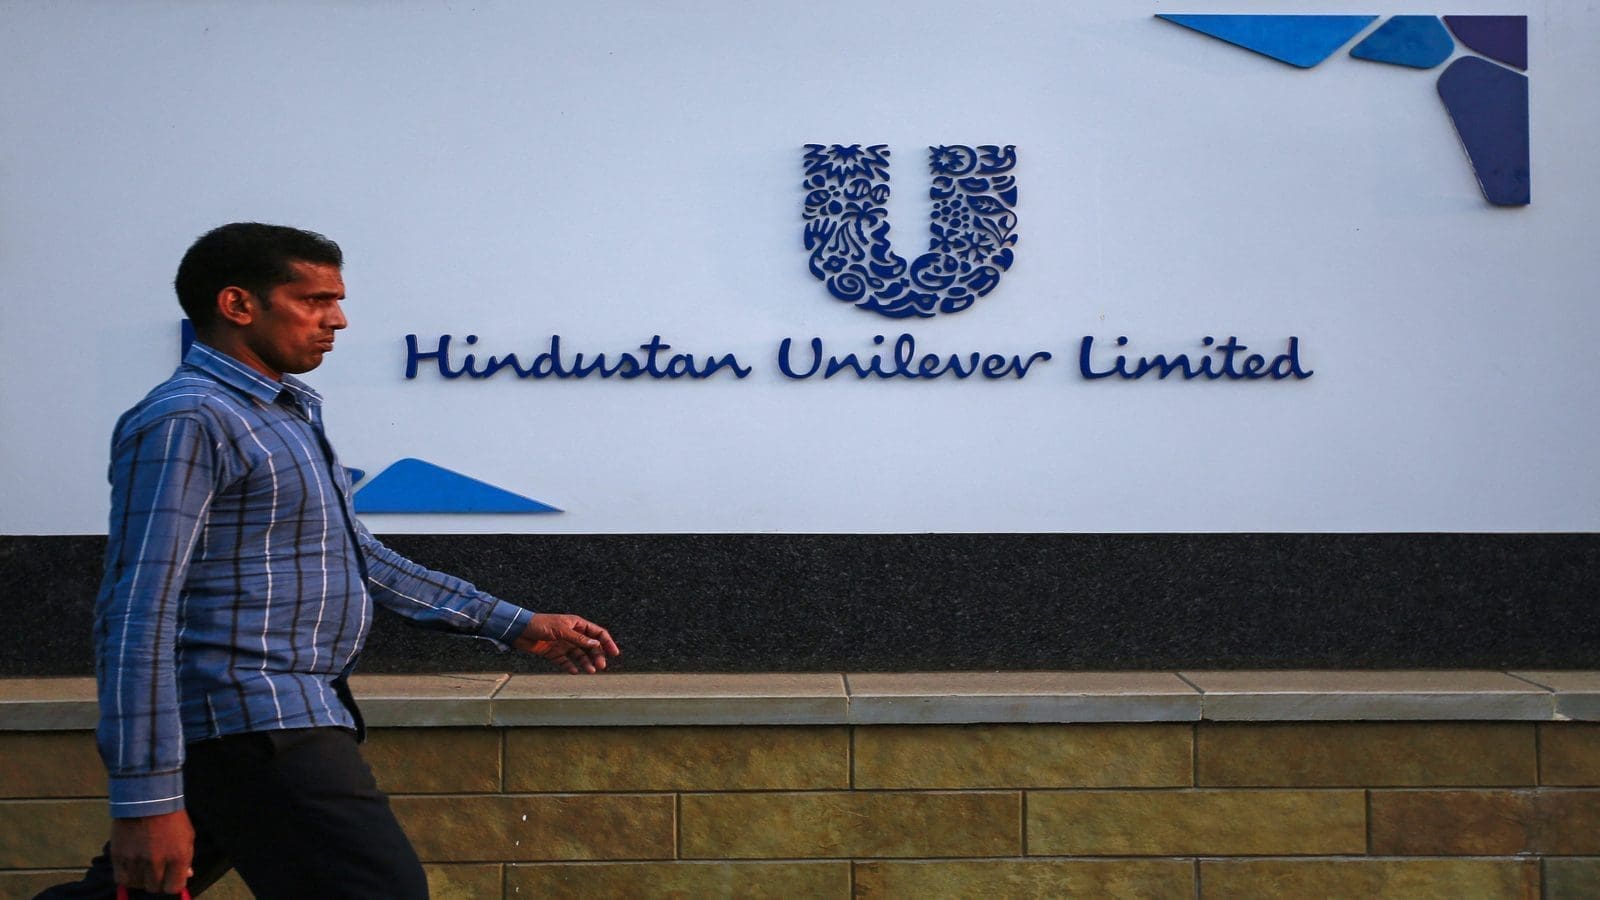 HUL and GSK agree to terminate OTC and oral care products distribution deal earlier than expected date